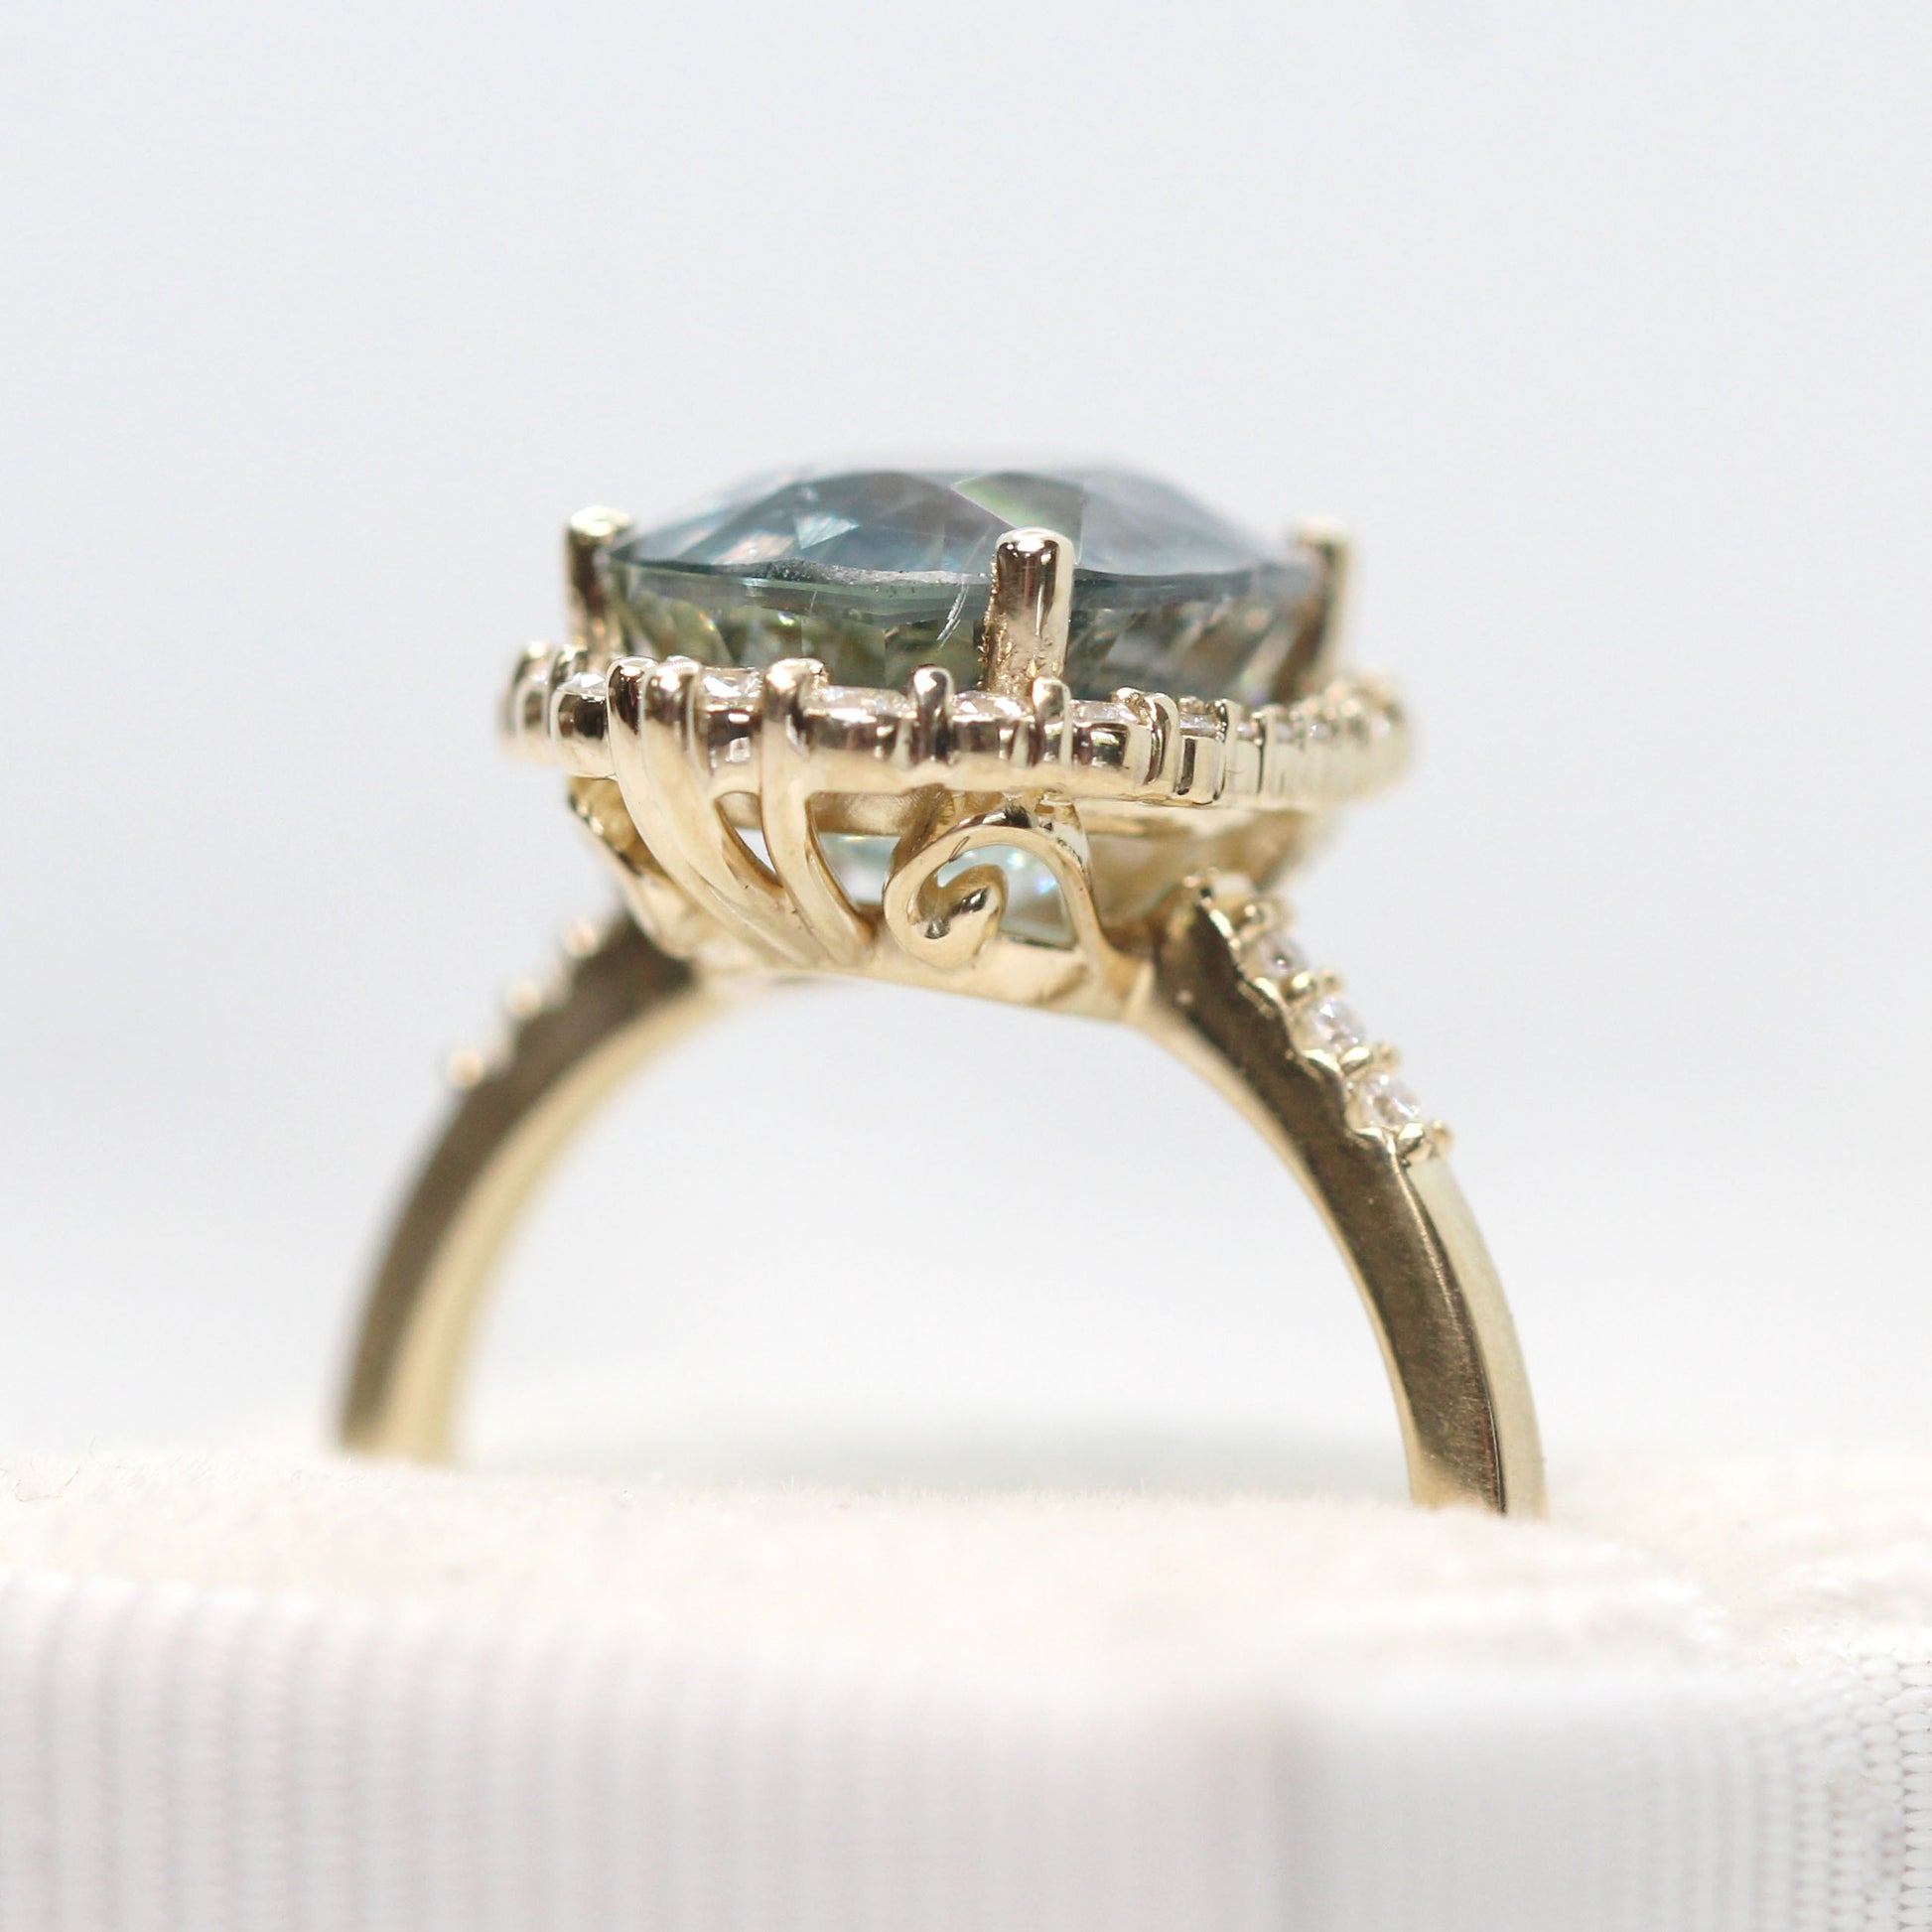 Grace Ring with a 5.80 Carat Light Blue Oval Sapphire and White Accent Diamonds in 14k Yellow Gold - Ready to Size and Ship - Midwinter Co. Alternative Bridal Rings and Modern Fine Jewelry